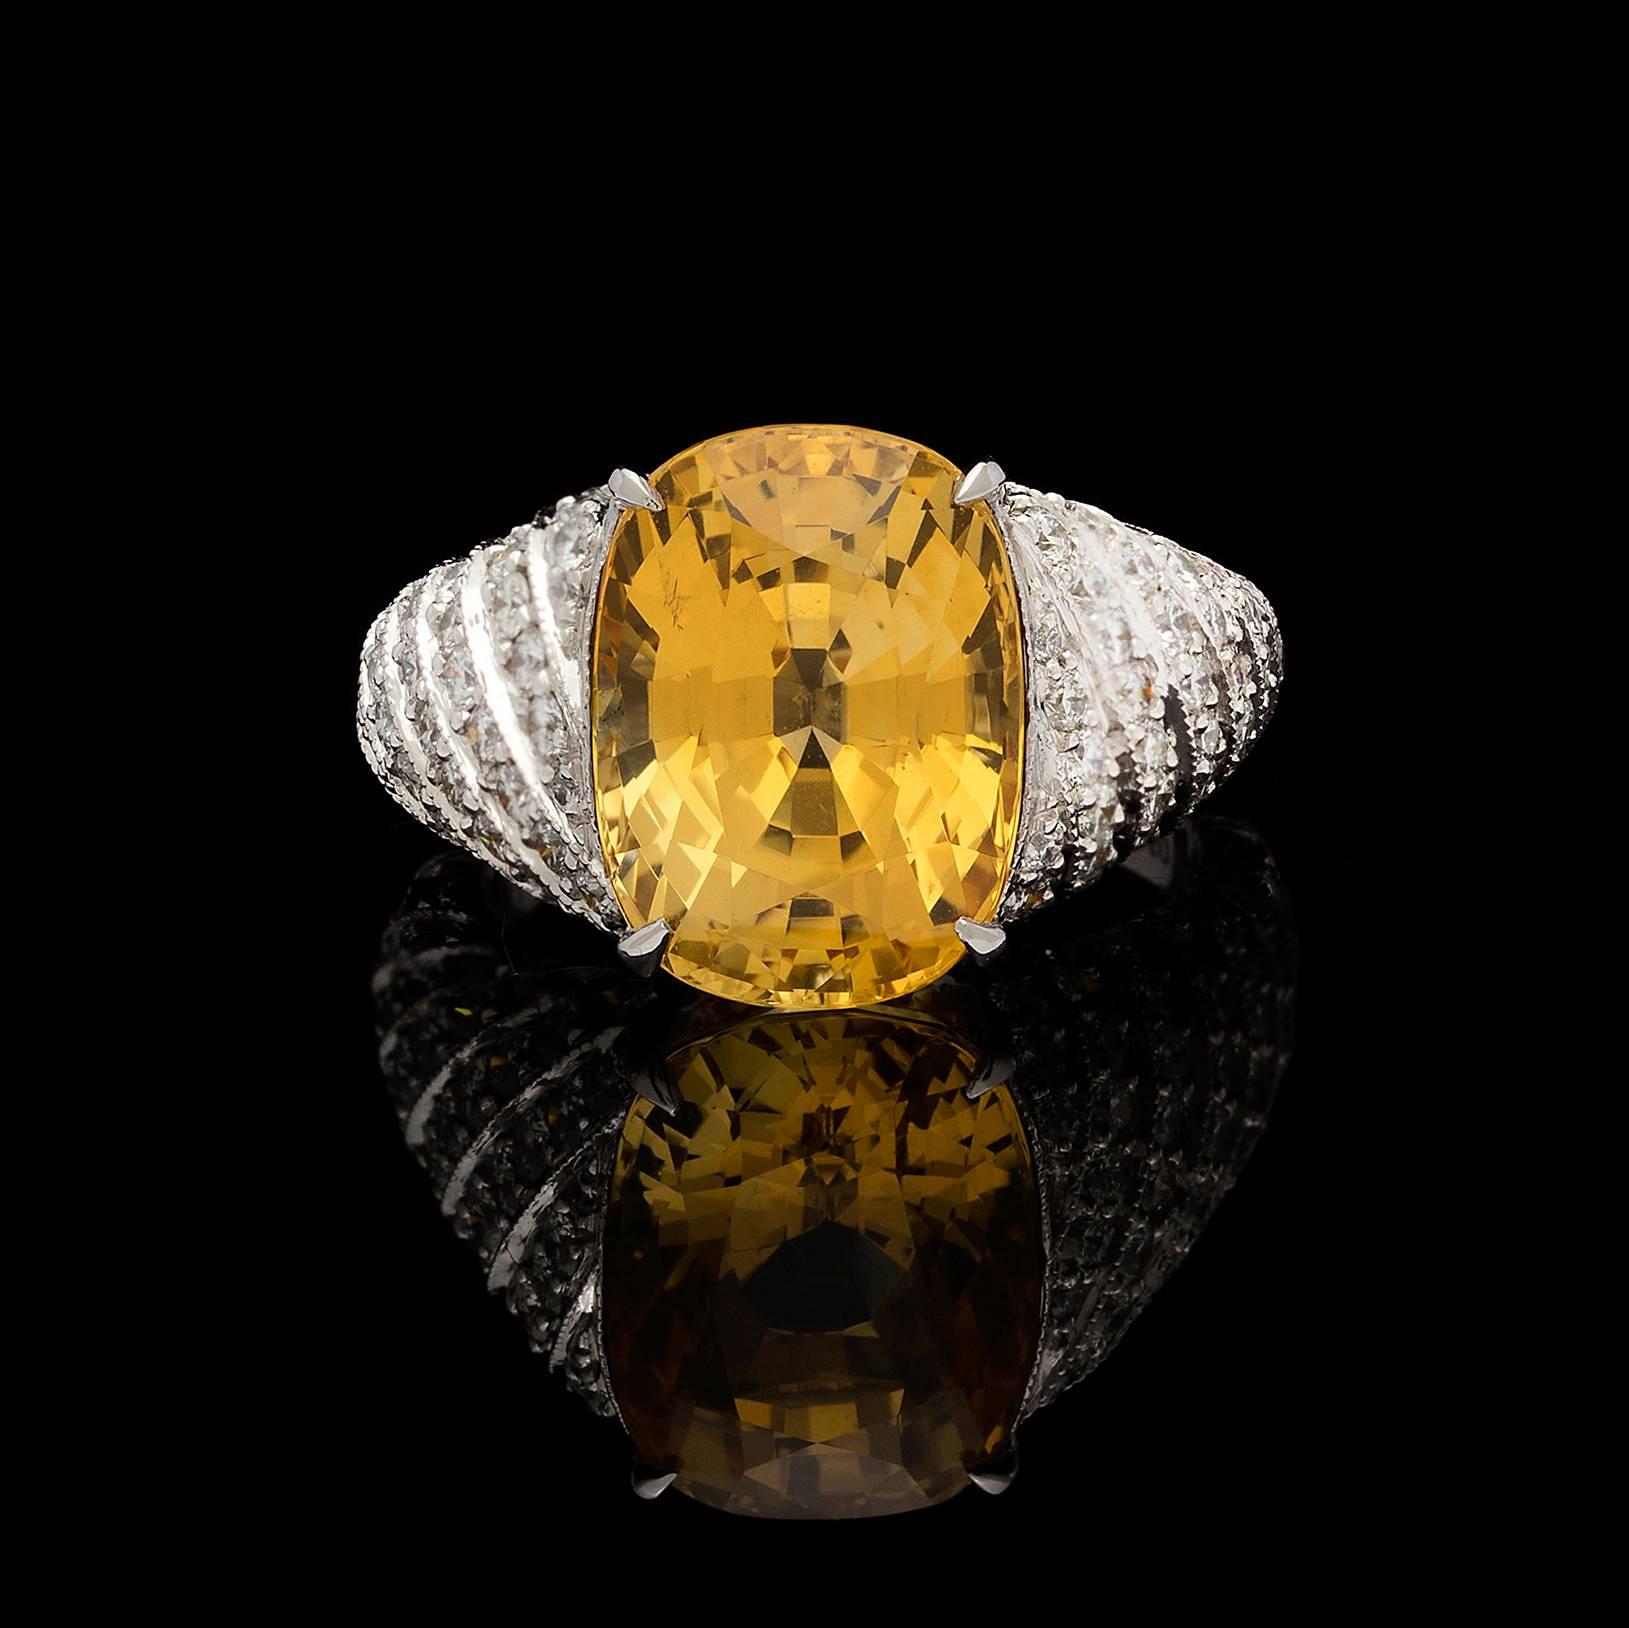 The platinum dome ring centers an oval-shaped yellow sapphire weighing 10.60 carats, with the wide, tapering mounting set with round brilliant-cut diamonds, weighing in total an estimated 3.00 carats. The ring is currently a size 6, can be sized up